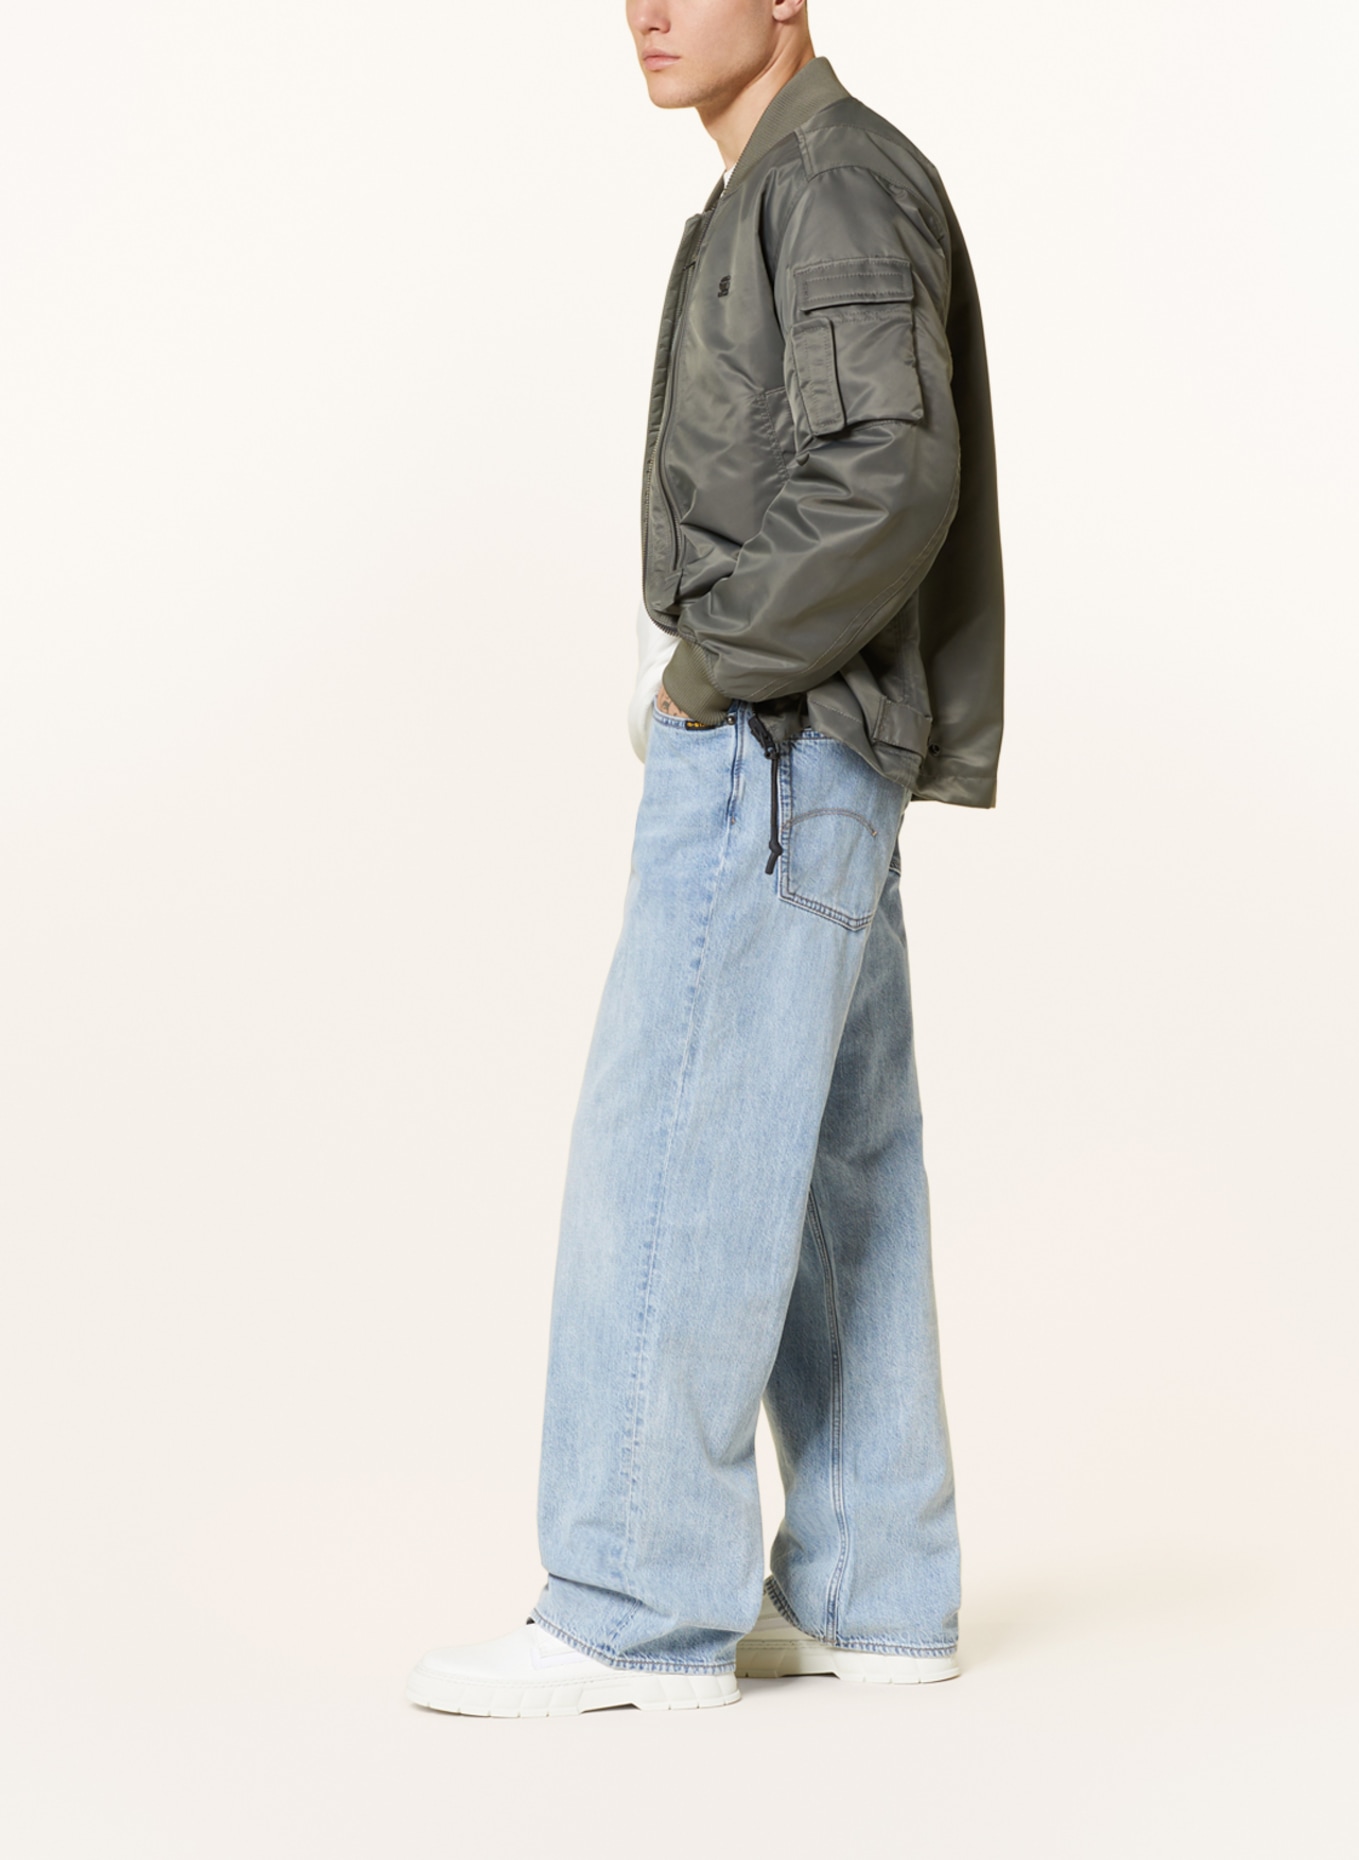 G-Star RAW Jeans TYPE 96 LOOSE Relaxed Straight Fit, Farbe: G339 sun faded cloudburst (Bild 4)